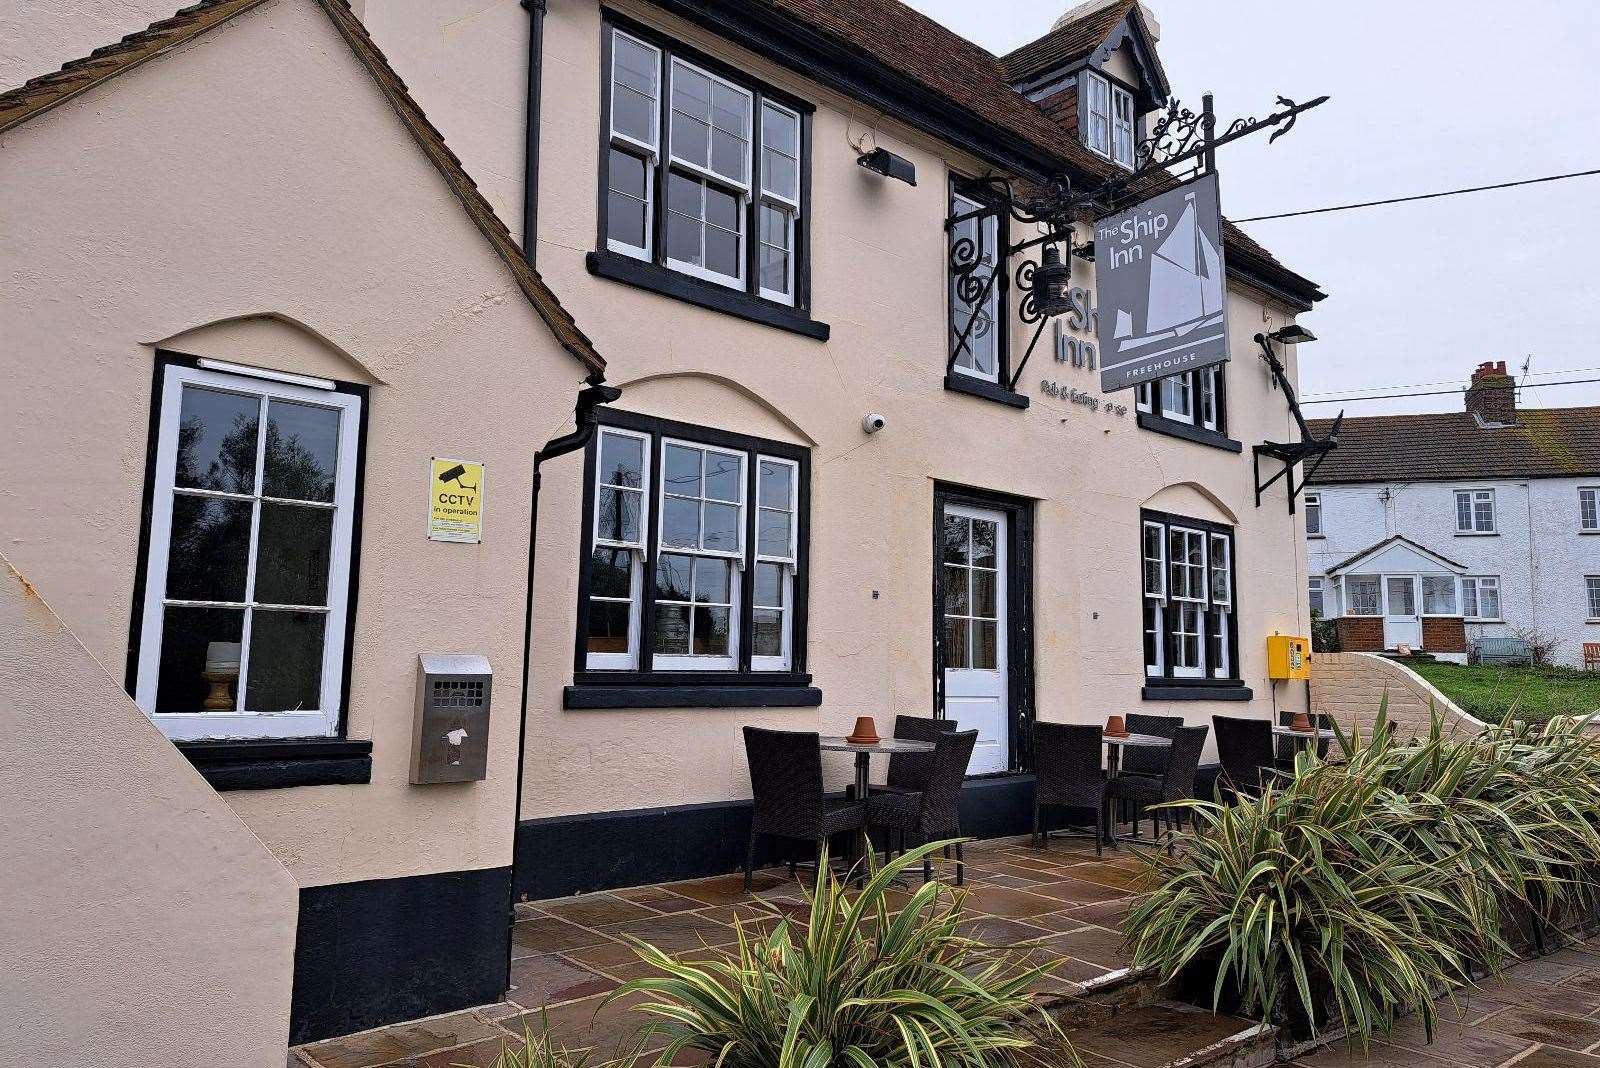 The Ship Inn at Conyer, between Sittingbourne and Faversham, closed last month